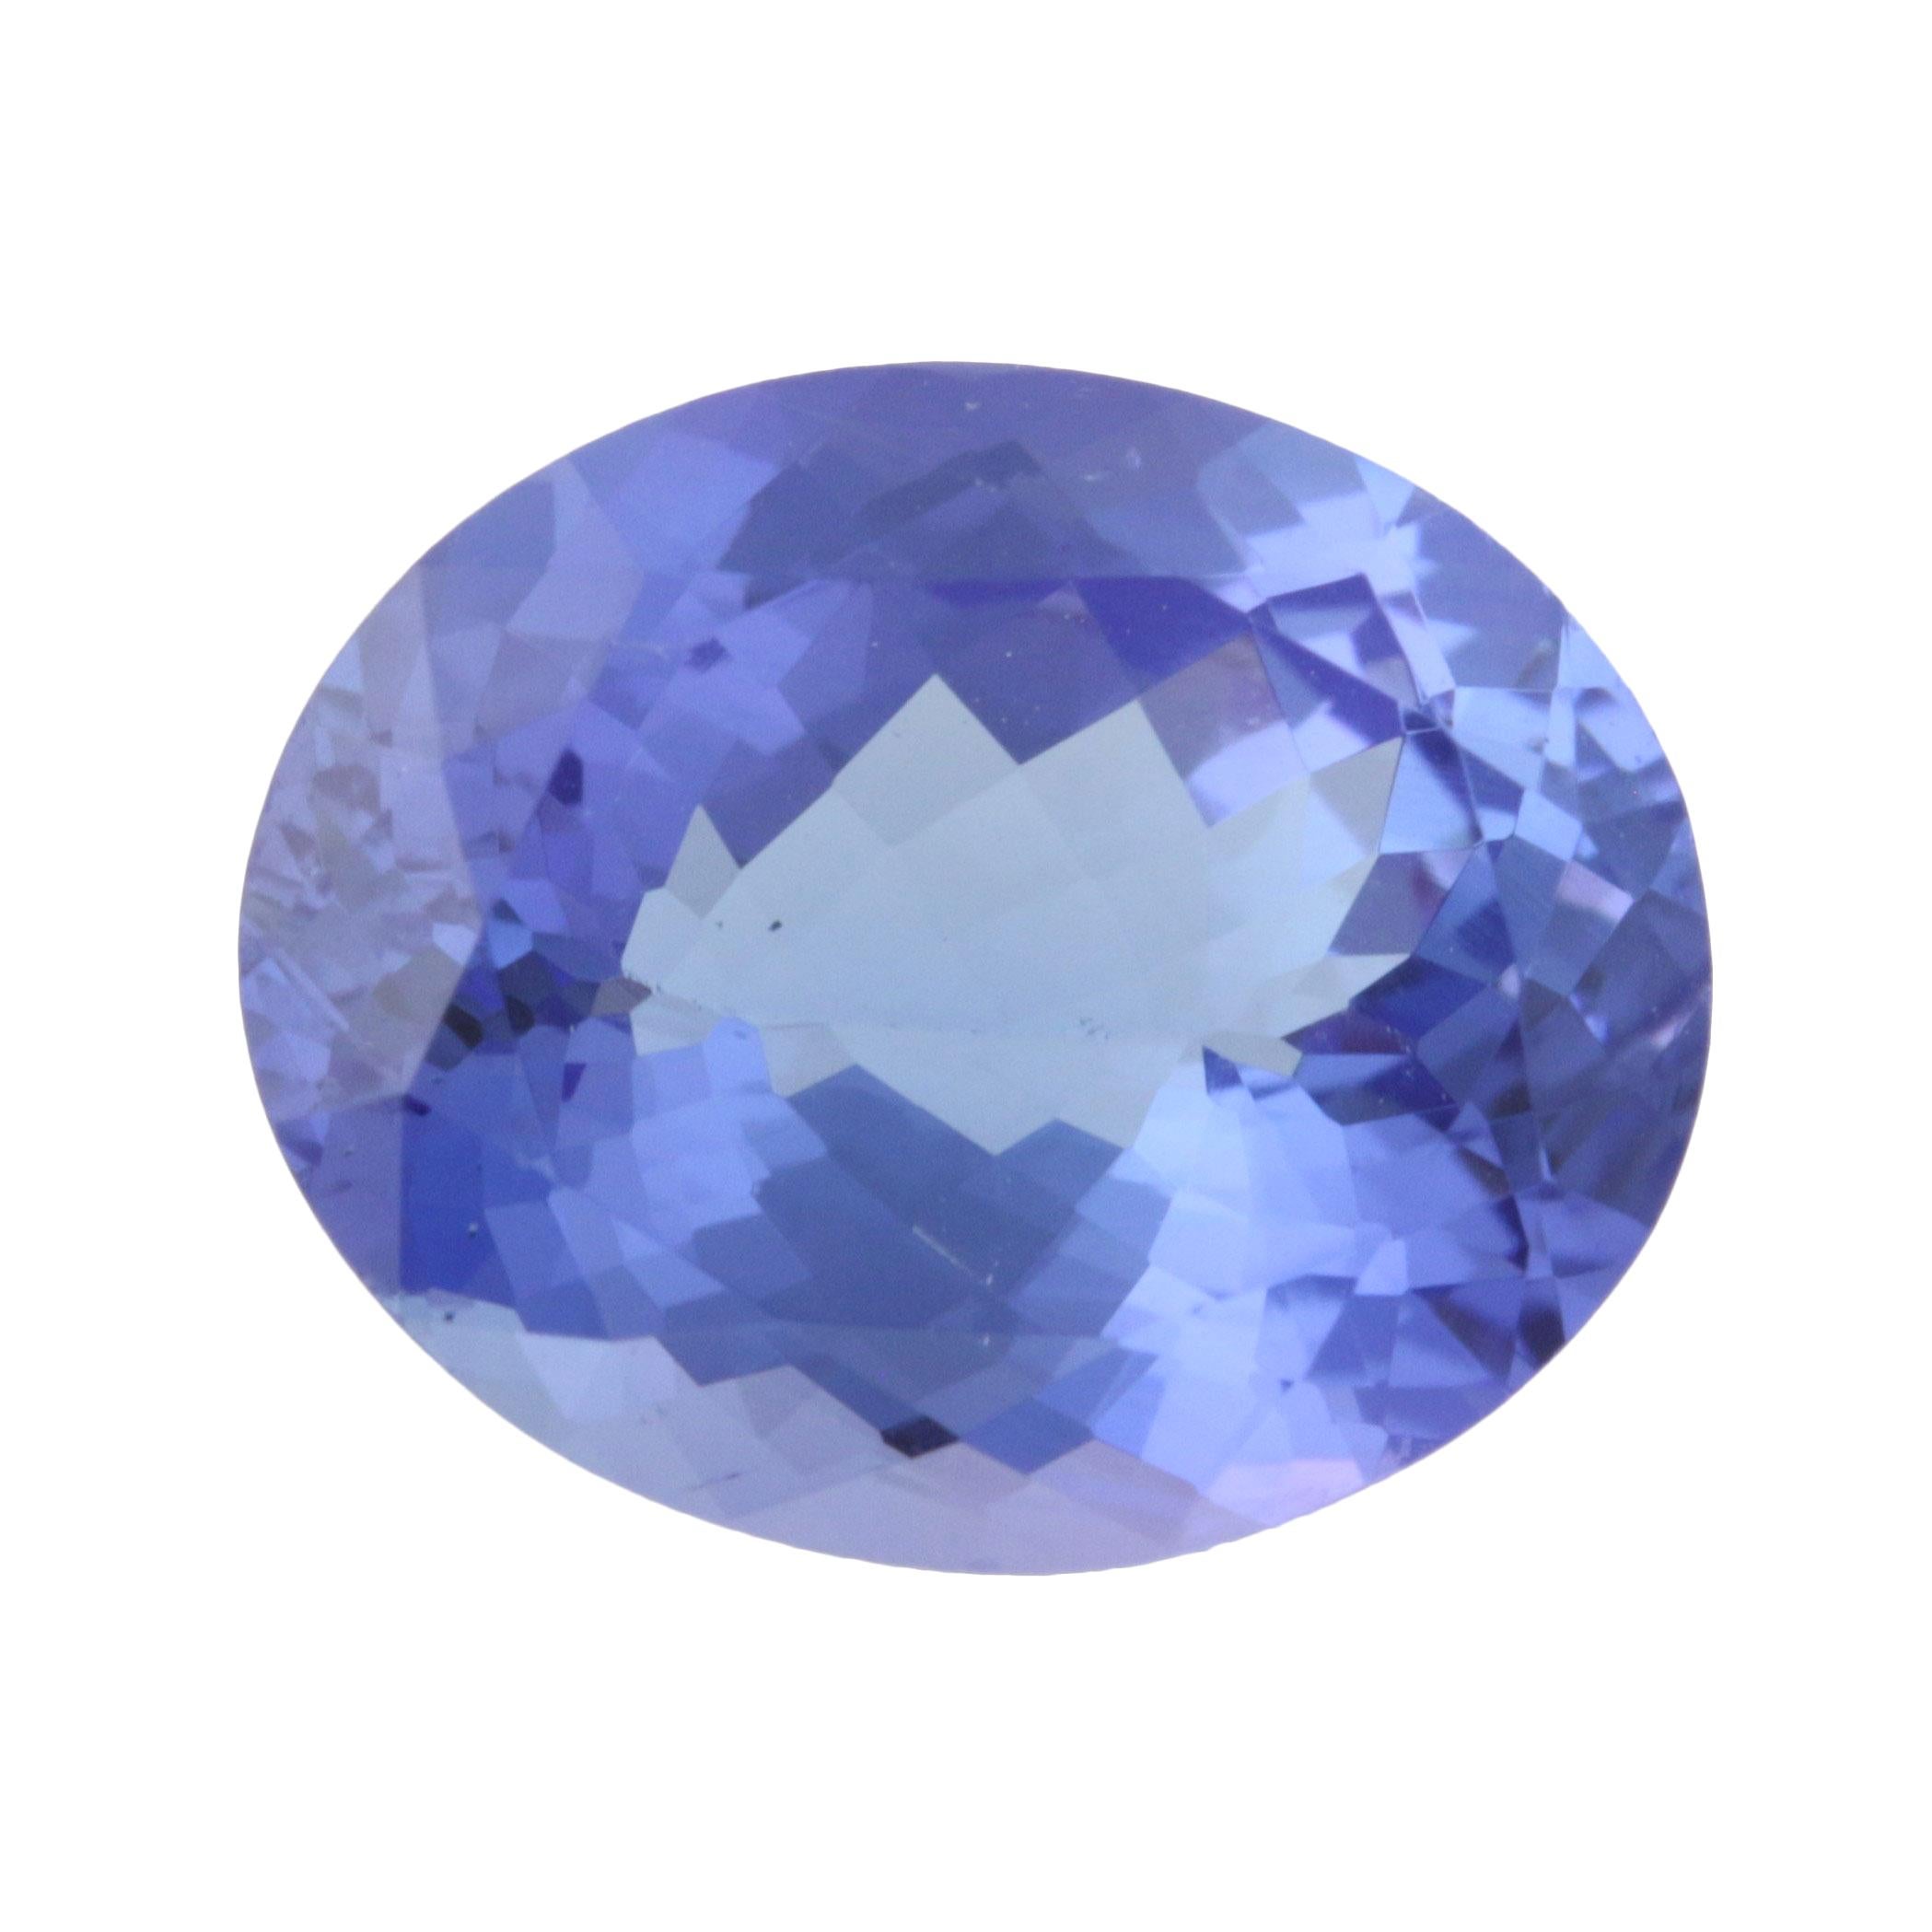 3.66 Carat Tanzanite Gemstone, Oval Cut Loose Solitaire For Sale